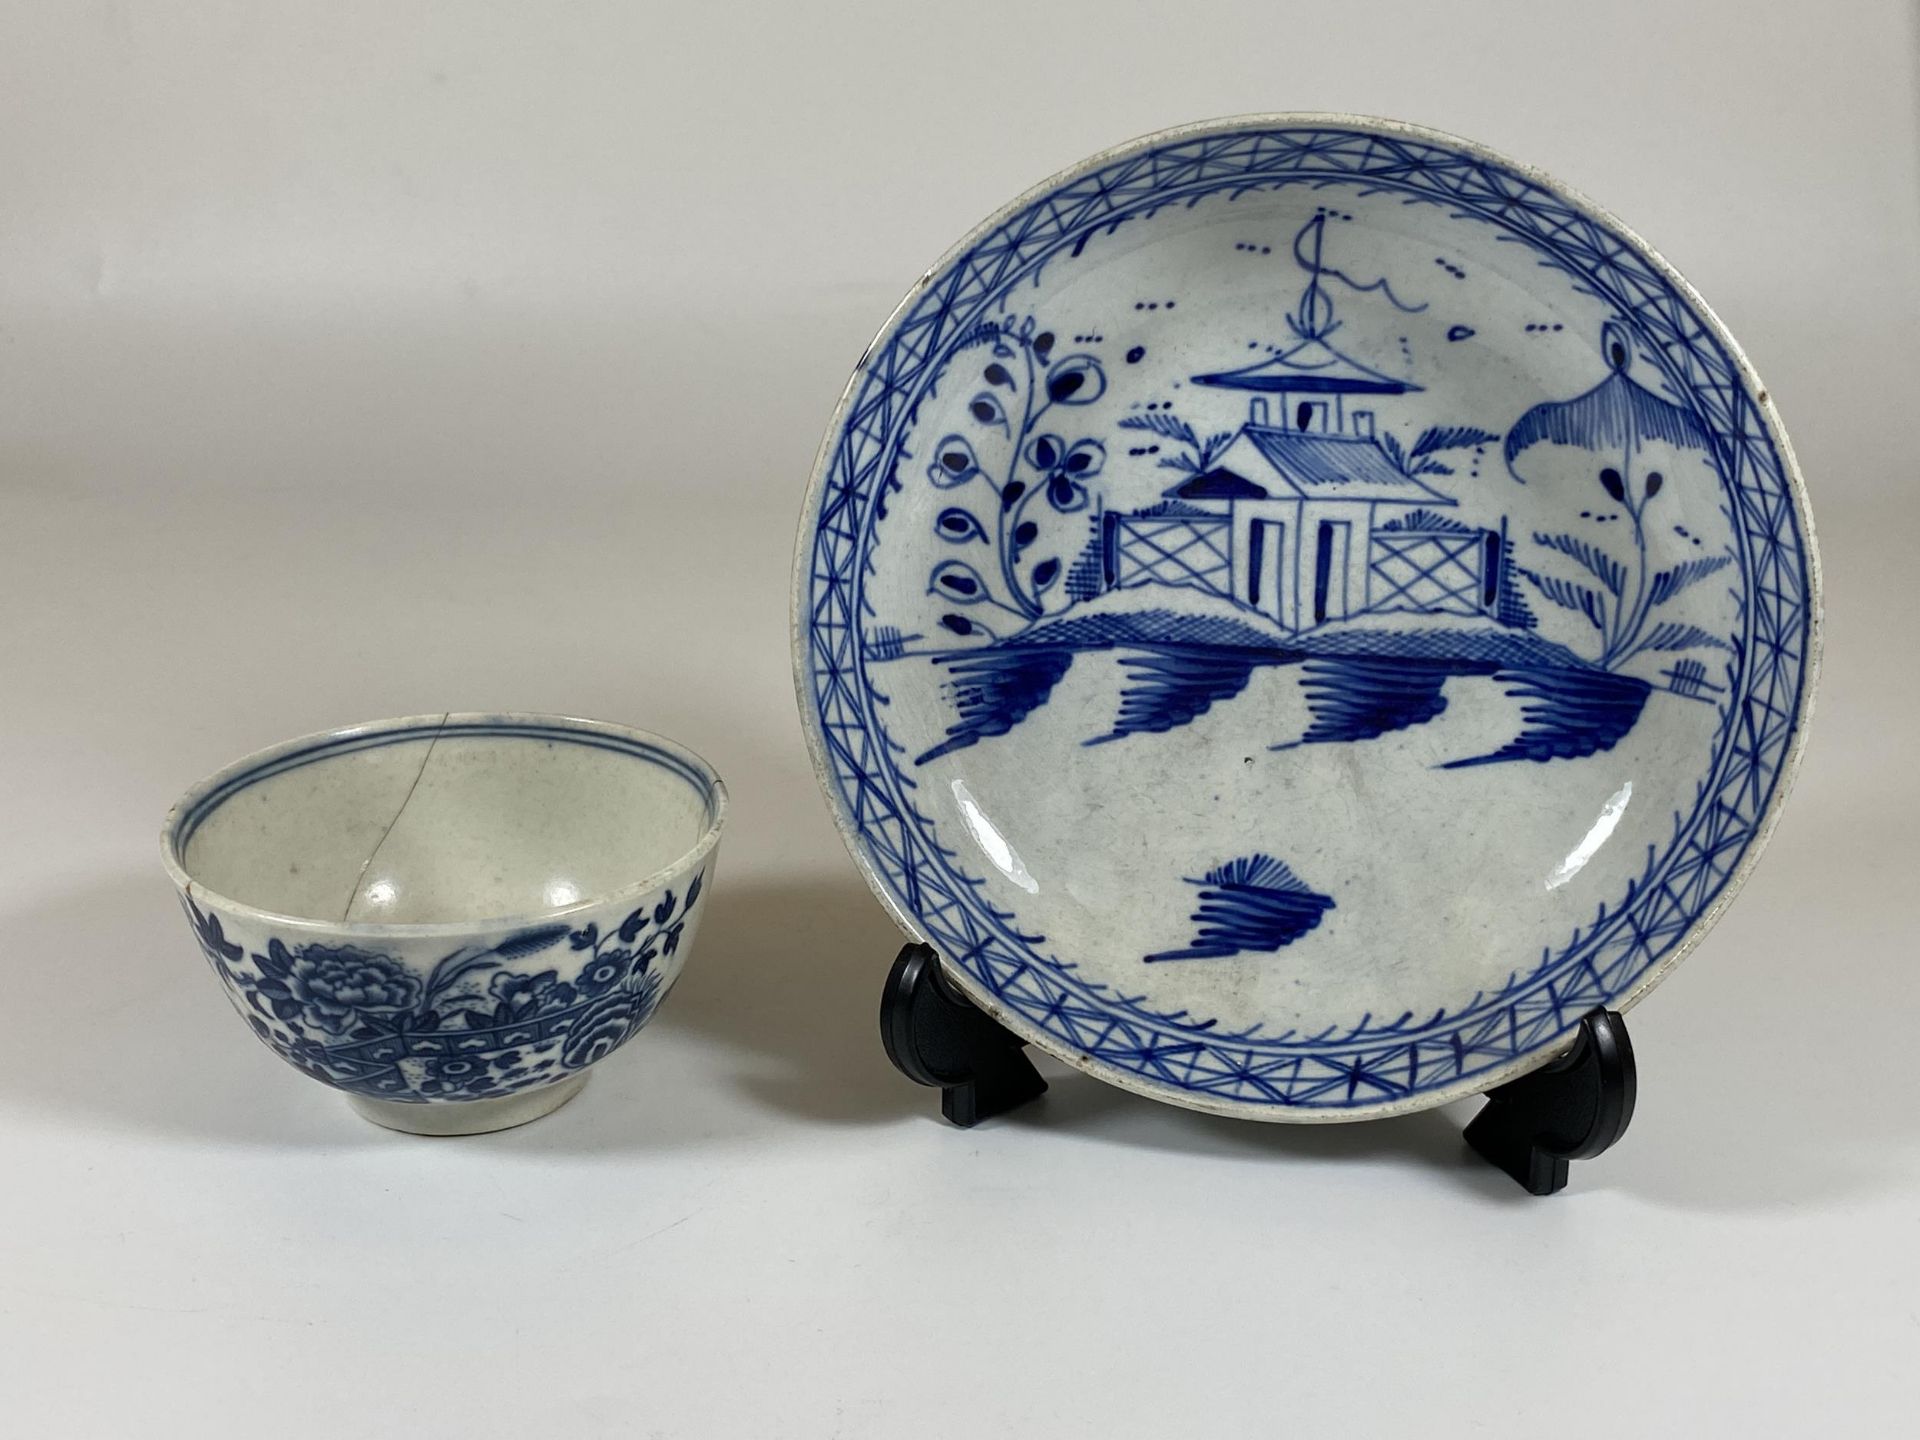 A MID-LATE 18TH CENTURY WORCESTER TEA BOWL WITH CRESCENT MOON MARK, (A/F) TOGETHER WITH MATCHING